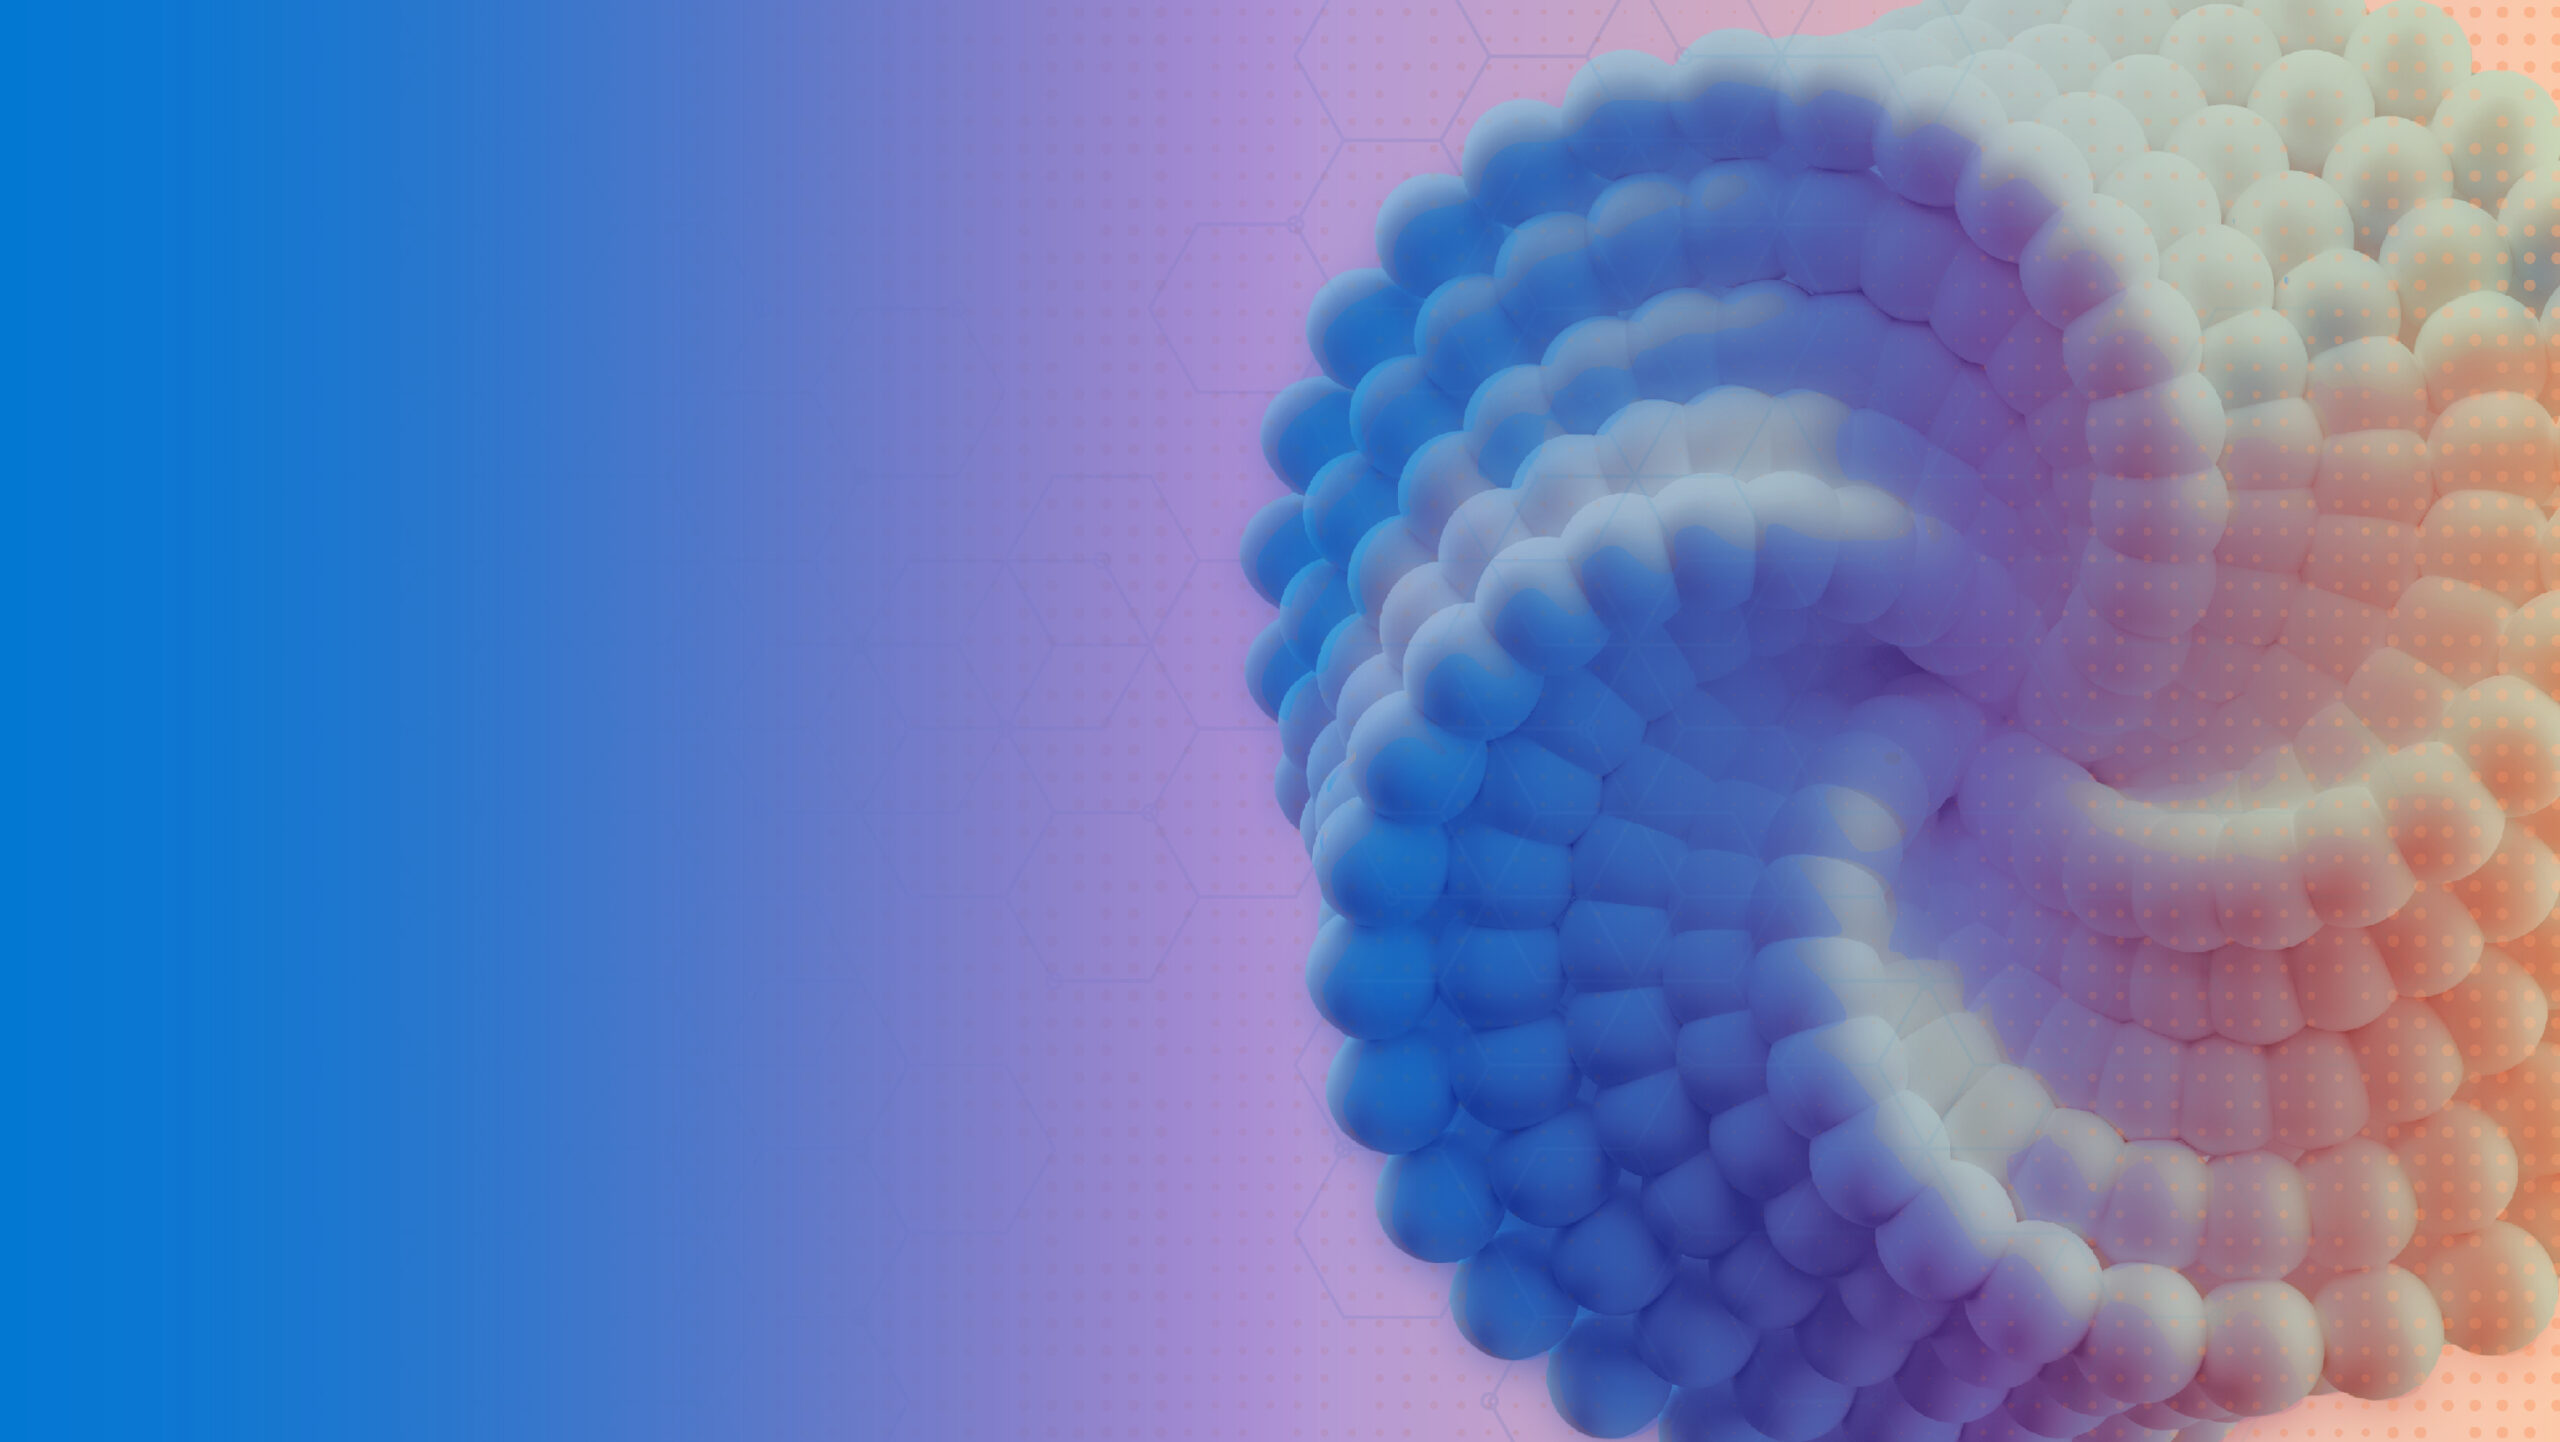 An abstract image in pastel colors showing a vortex of vectors.